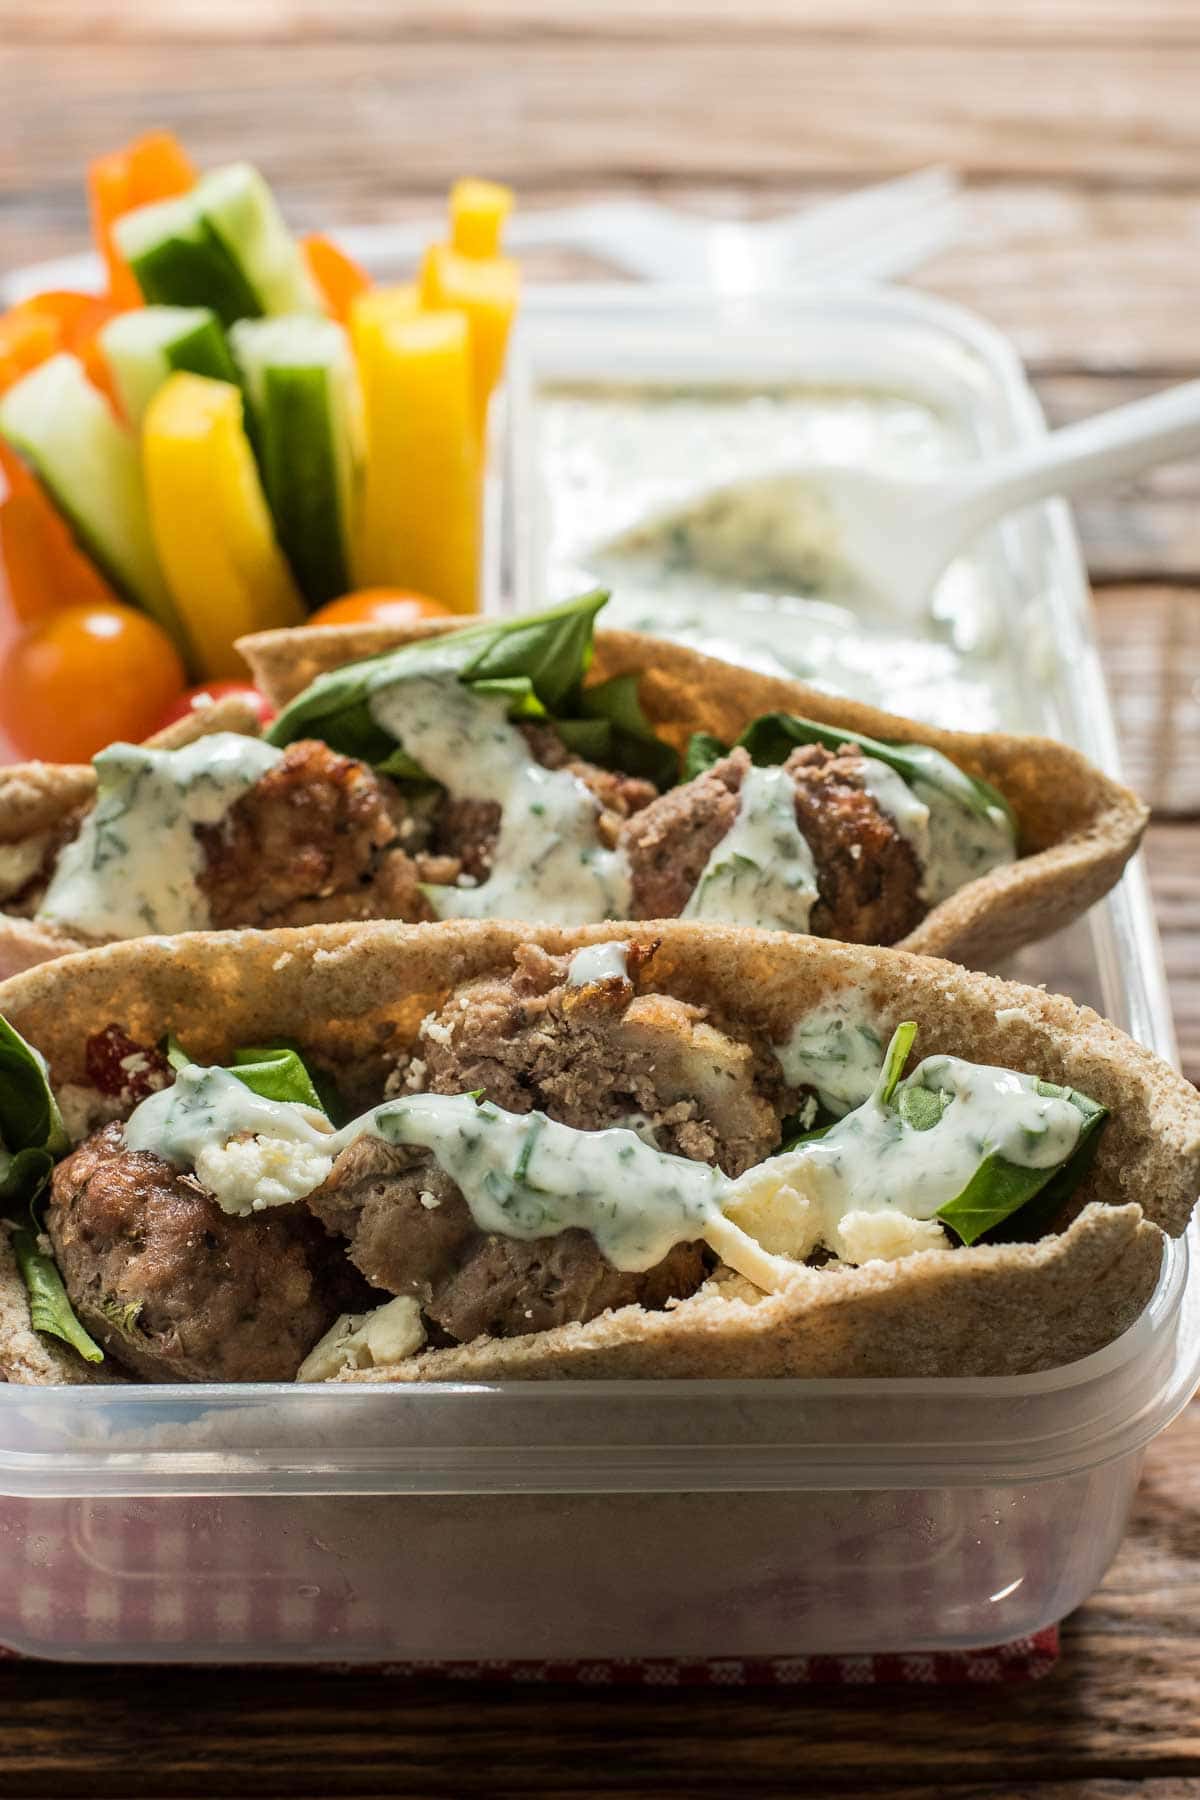 This Mediterranean Meatball Pita Sandwich is the perfect weeknight meal. The meatballs are great for freezing too!